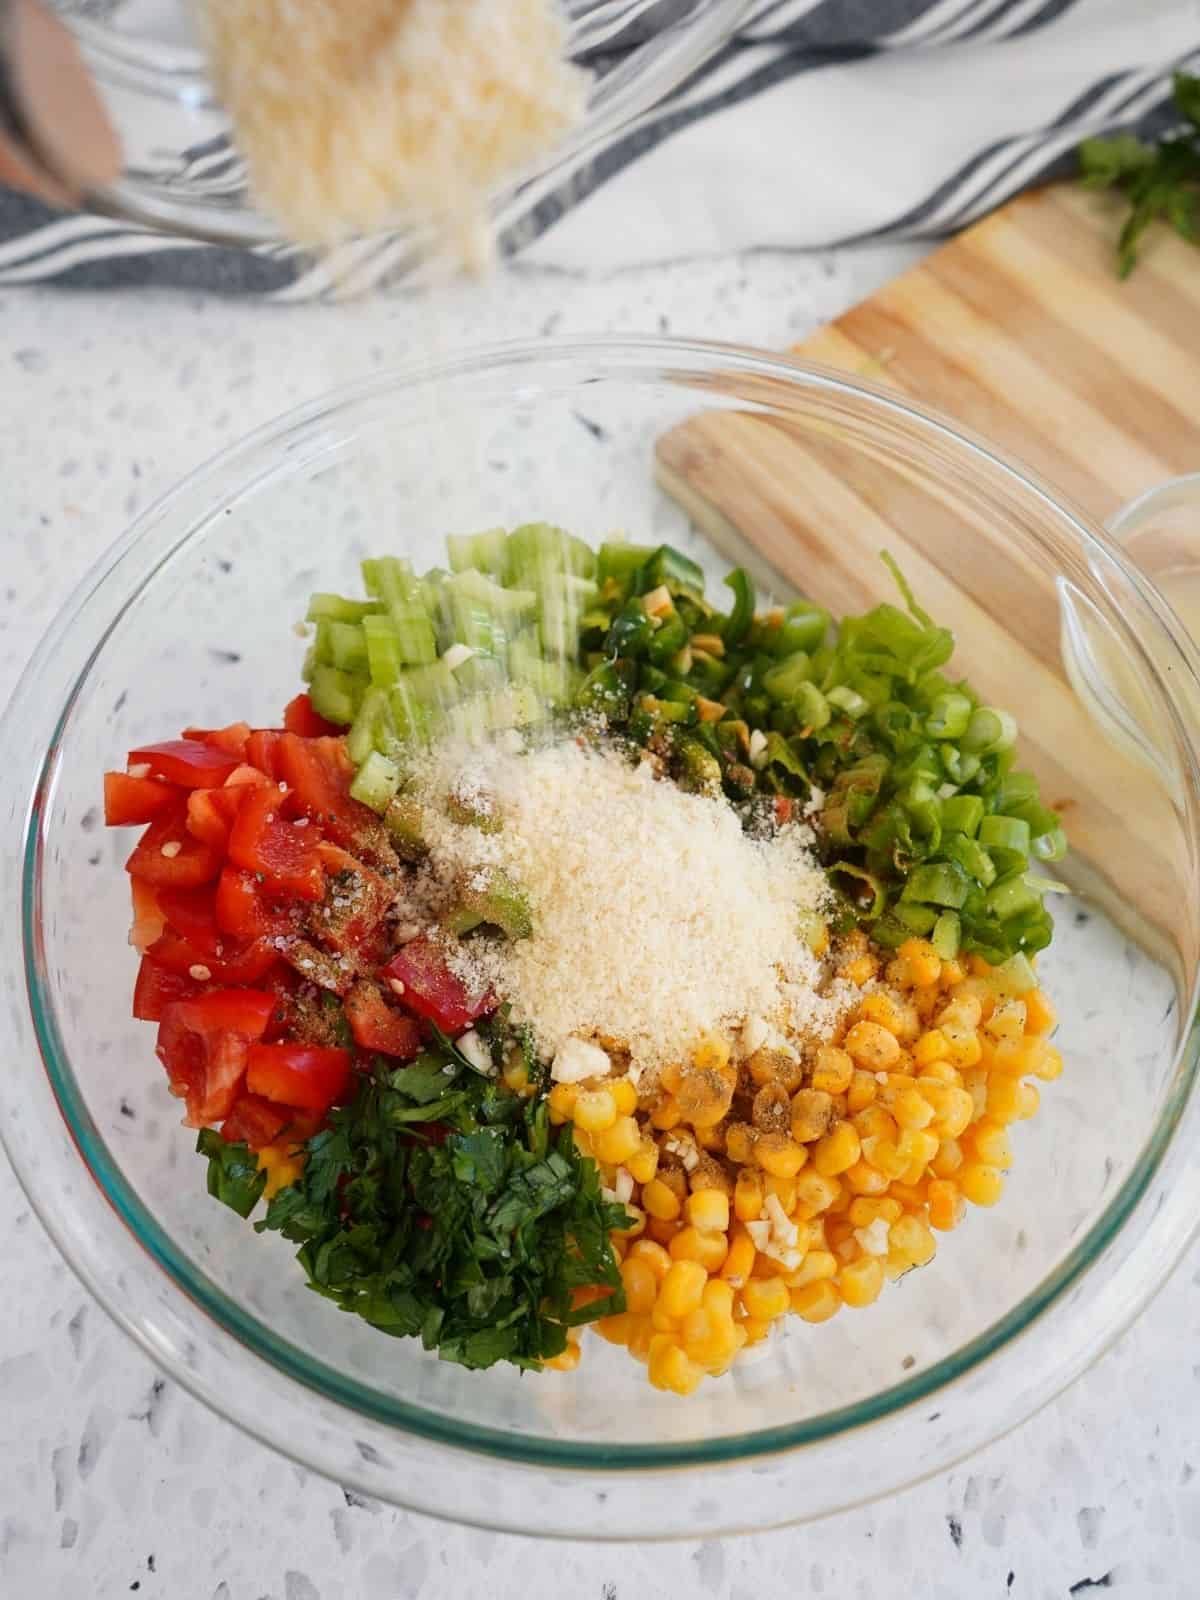 Add Parmesan cheese to bowl of salad ingredients.